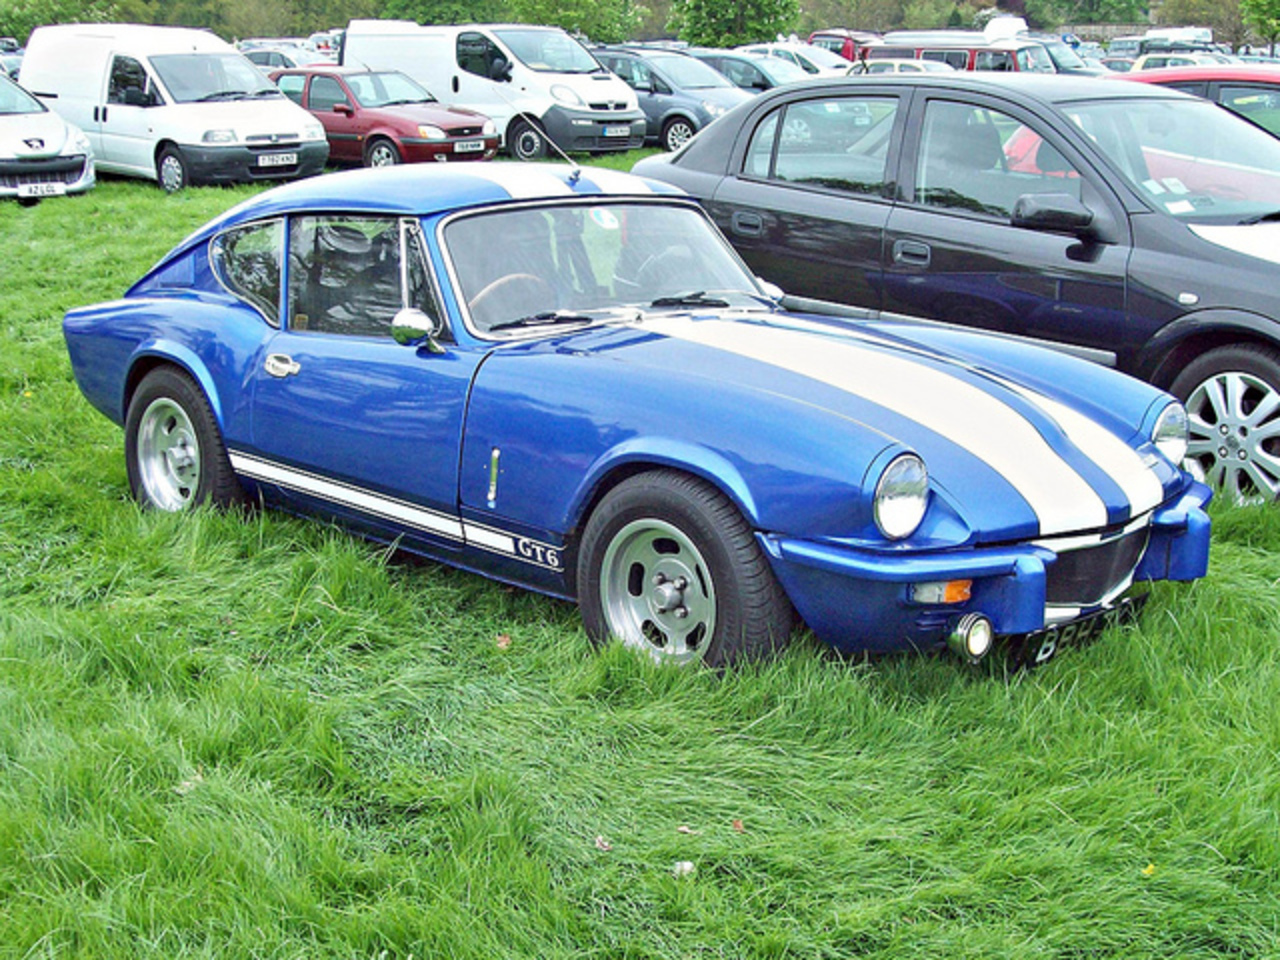 377 Triumph GT6 Mk3 (modified) (1971) | Flickr - Photo Sharing!